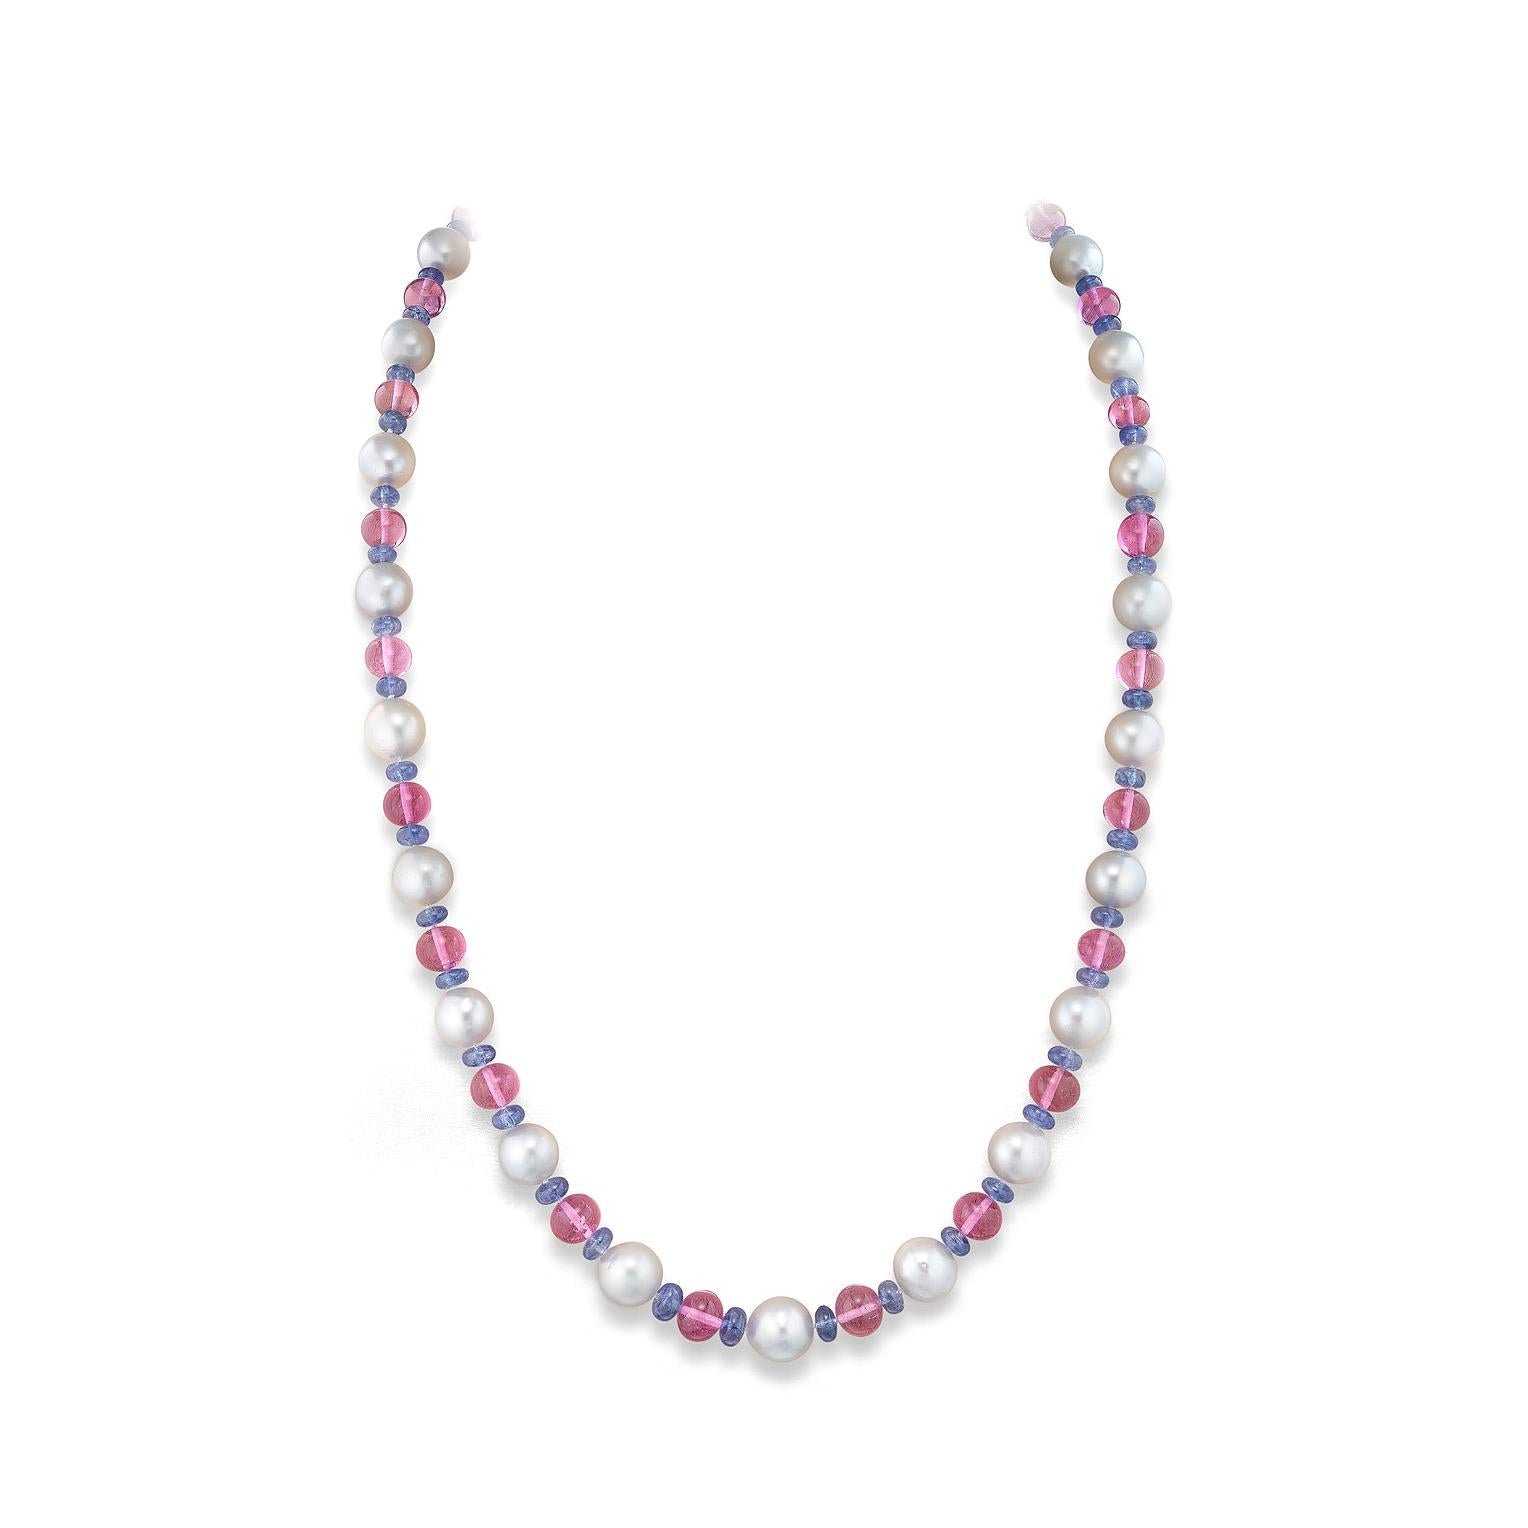 South Sea pearls necklace with 24 pink beads sapphires 173.38 cts, 48 beads sapphires 94.94 cts with 18kt white gold clasp     